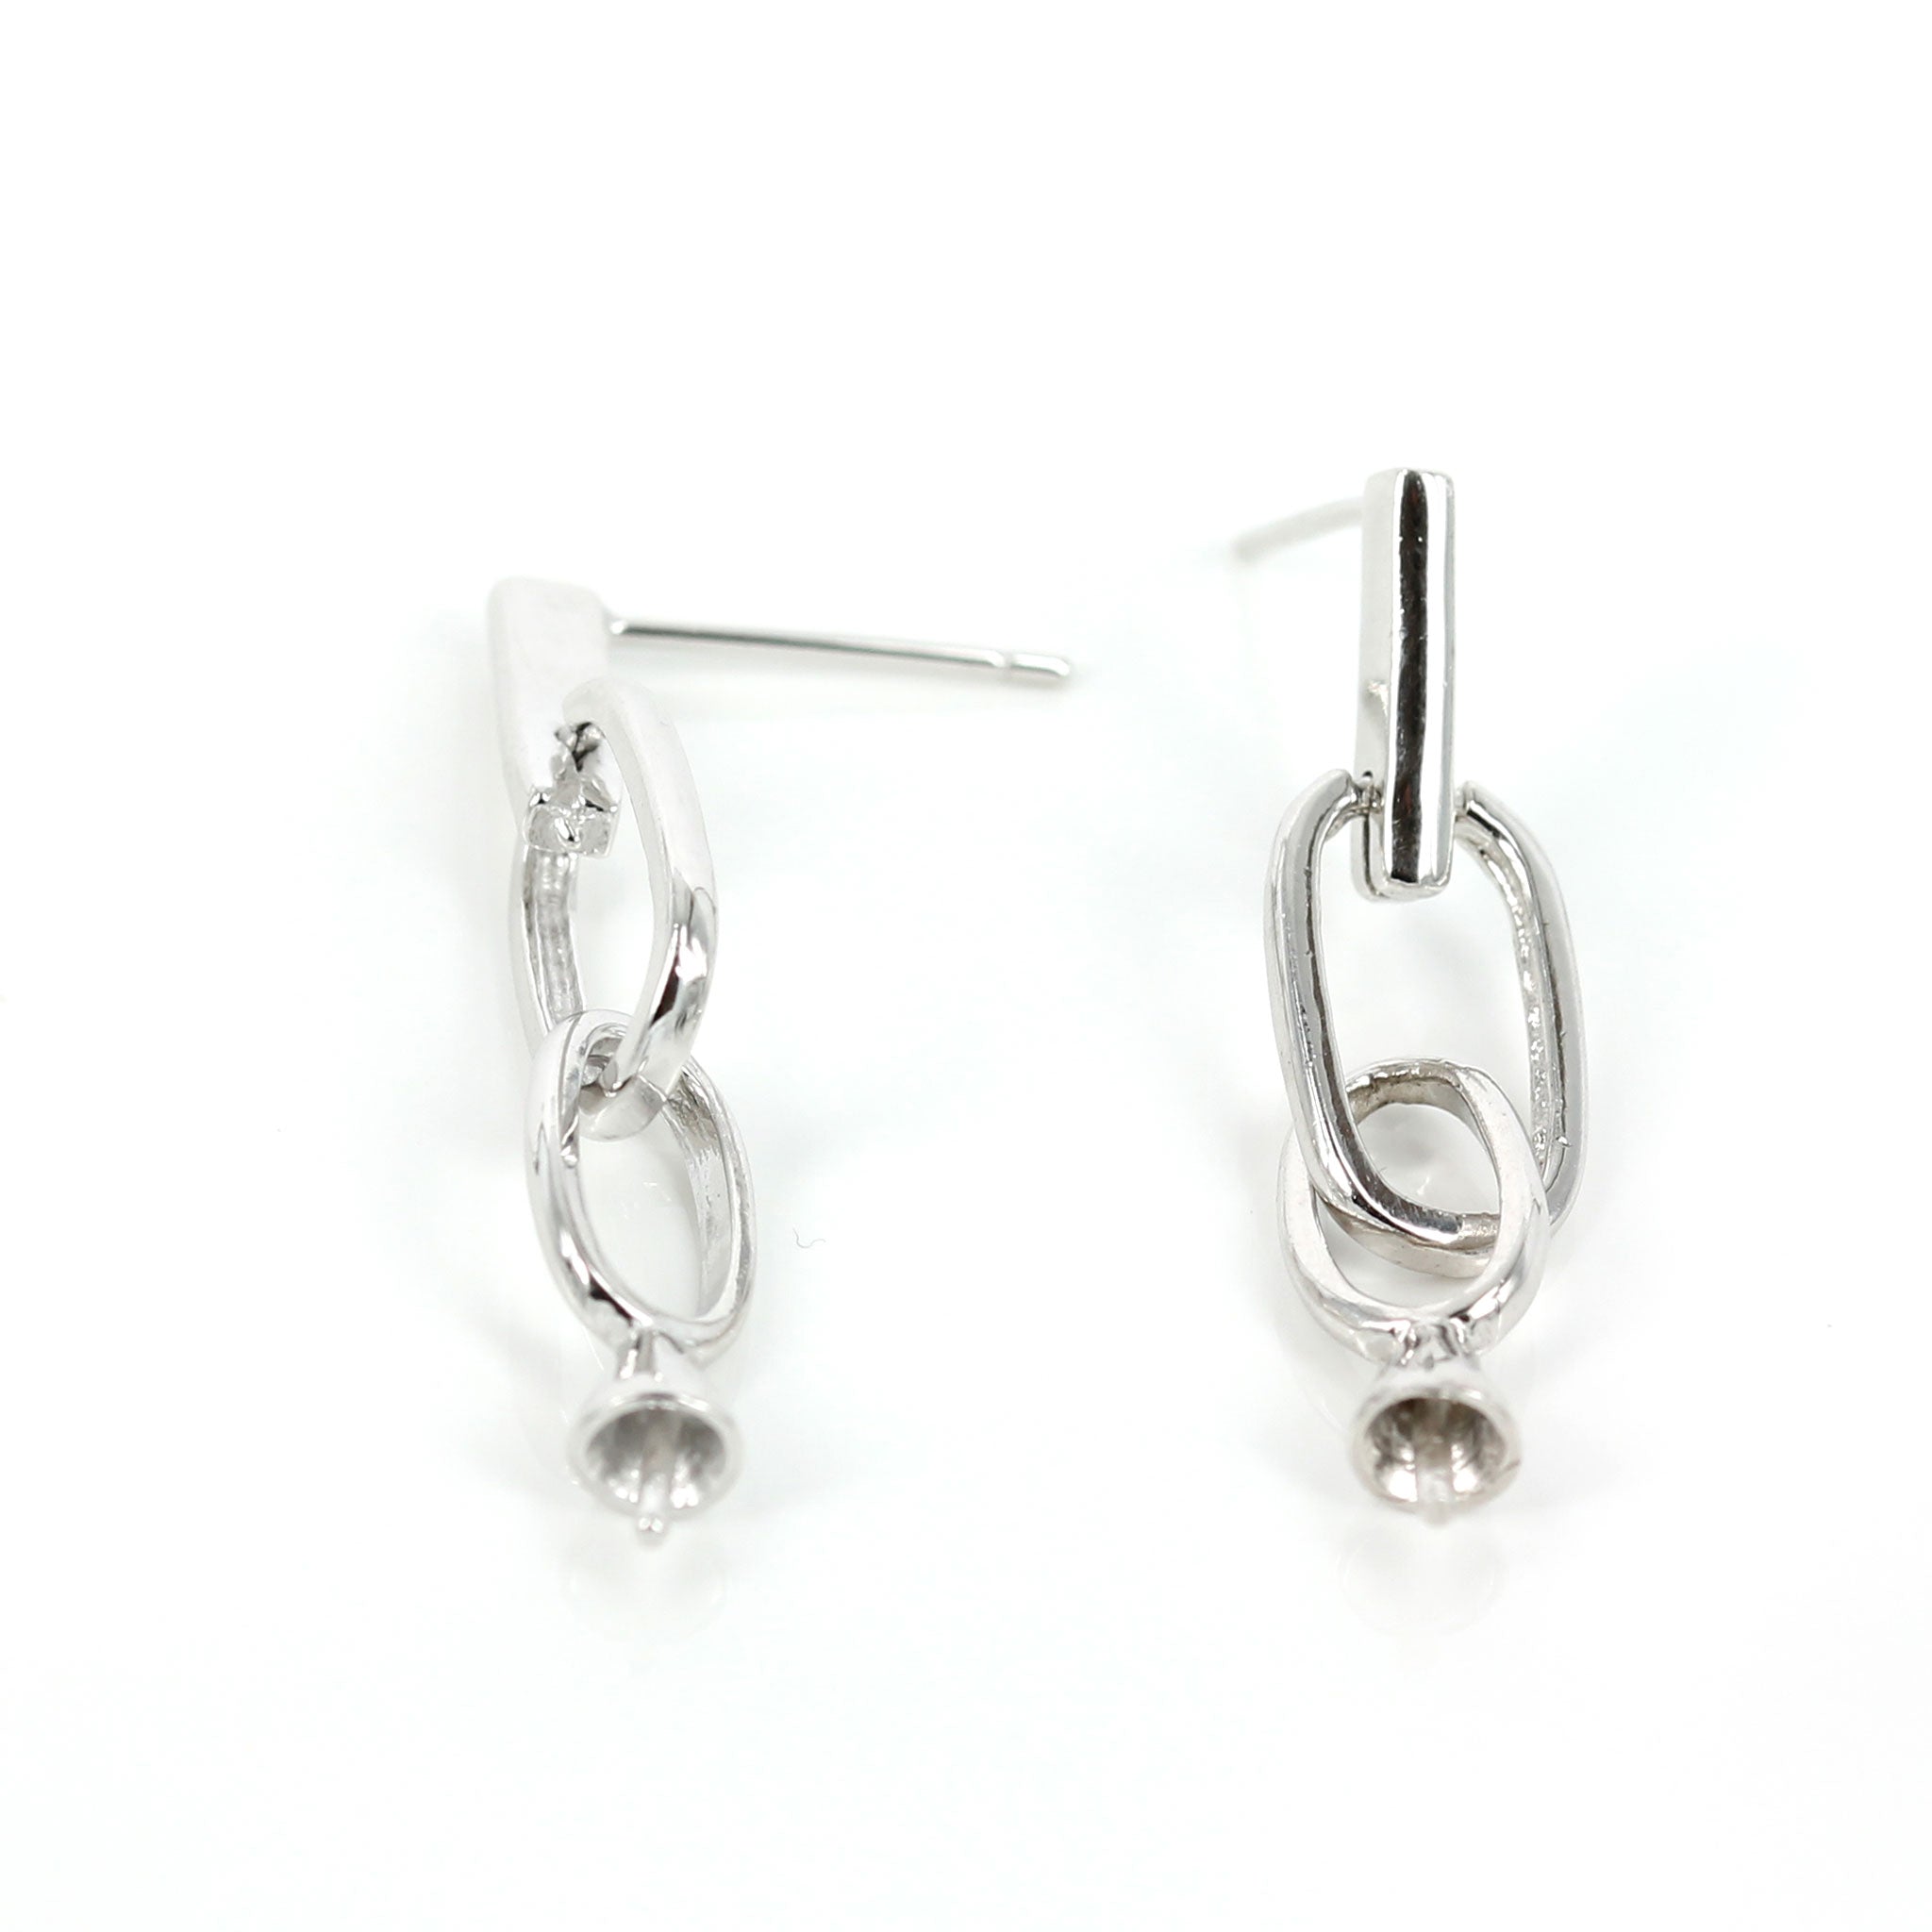 Ear Posts with Rings and Cup and Peg Mounting in Sterling Silver